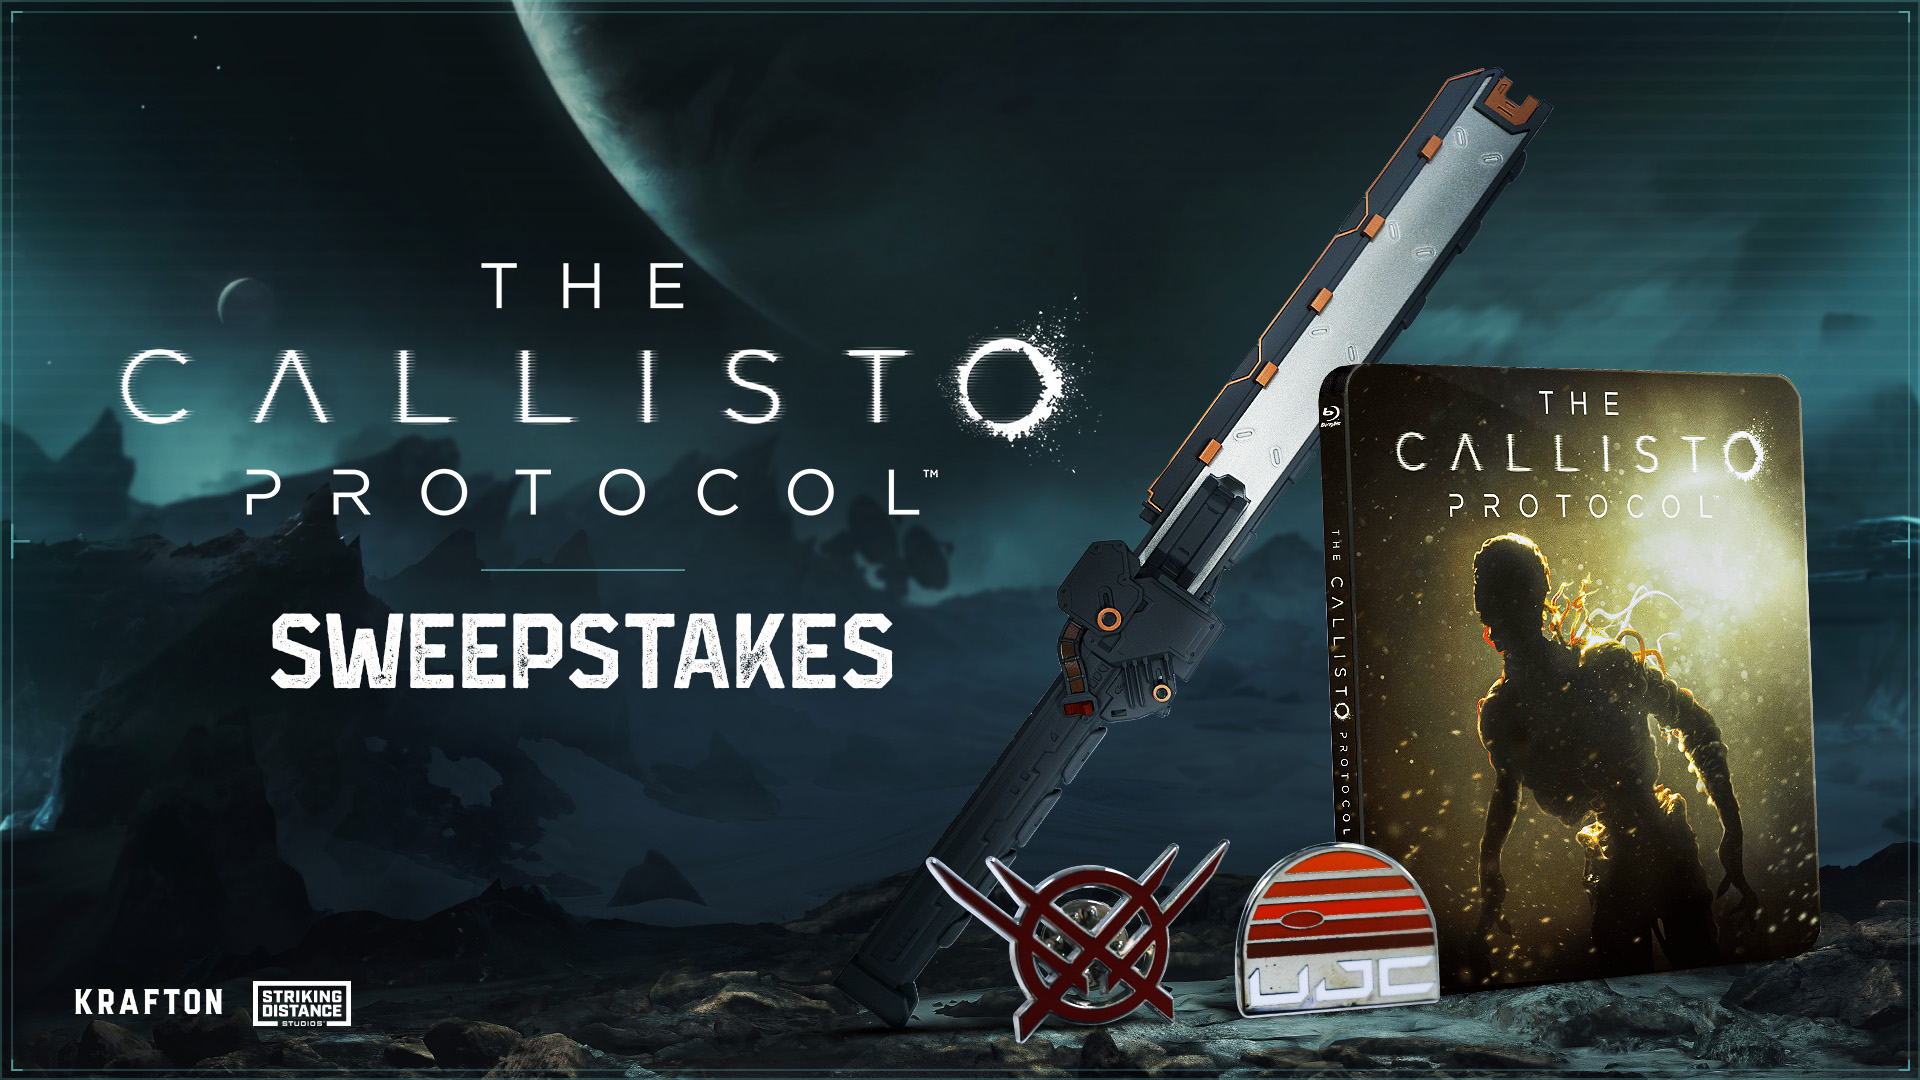 How to Get Exclusives in The Callisto Protocol